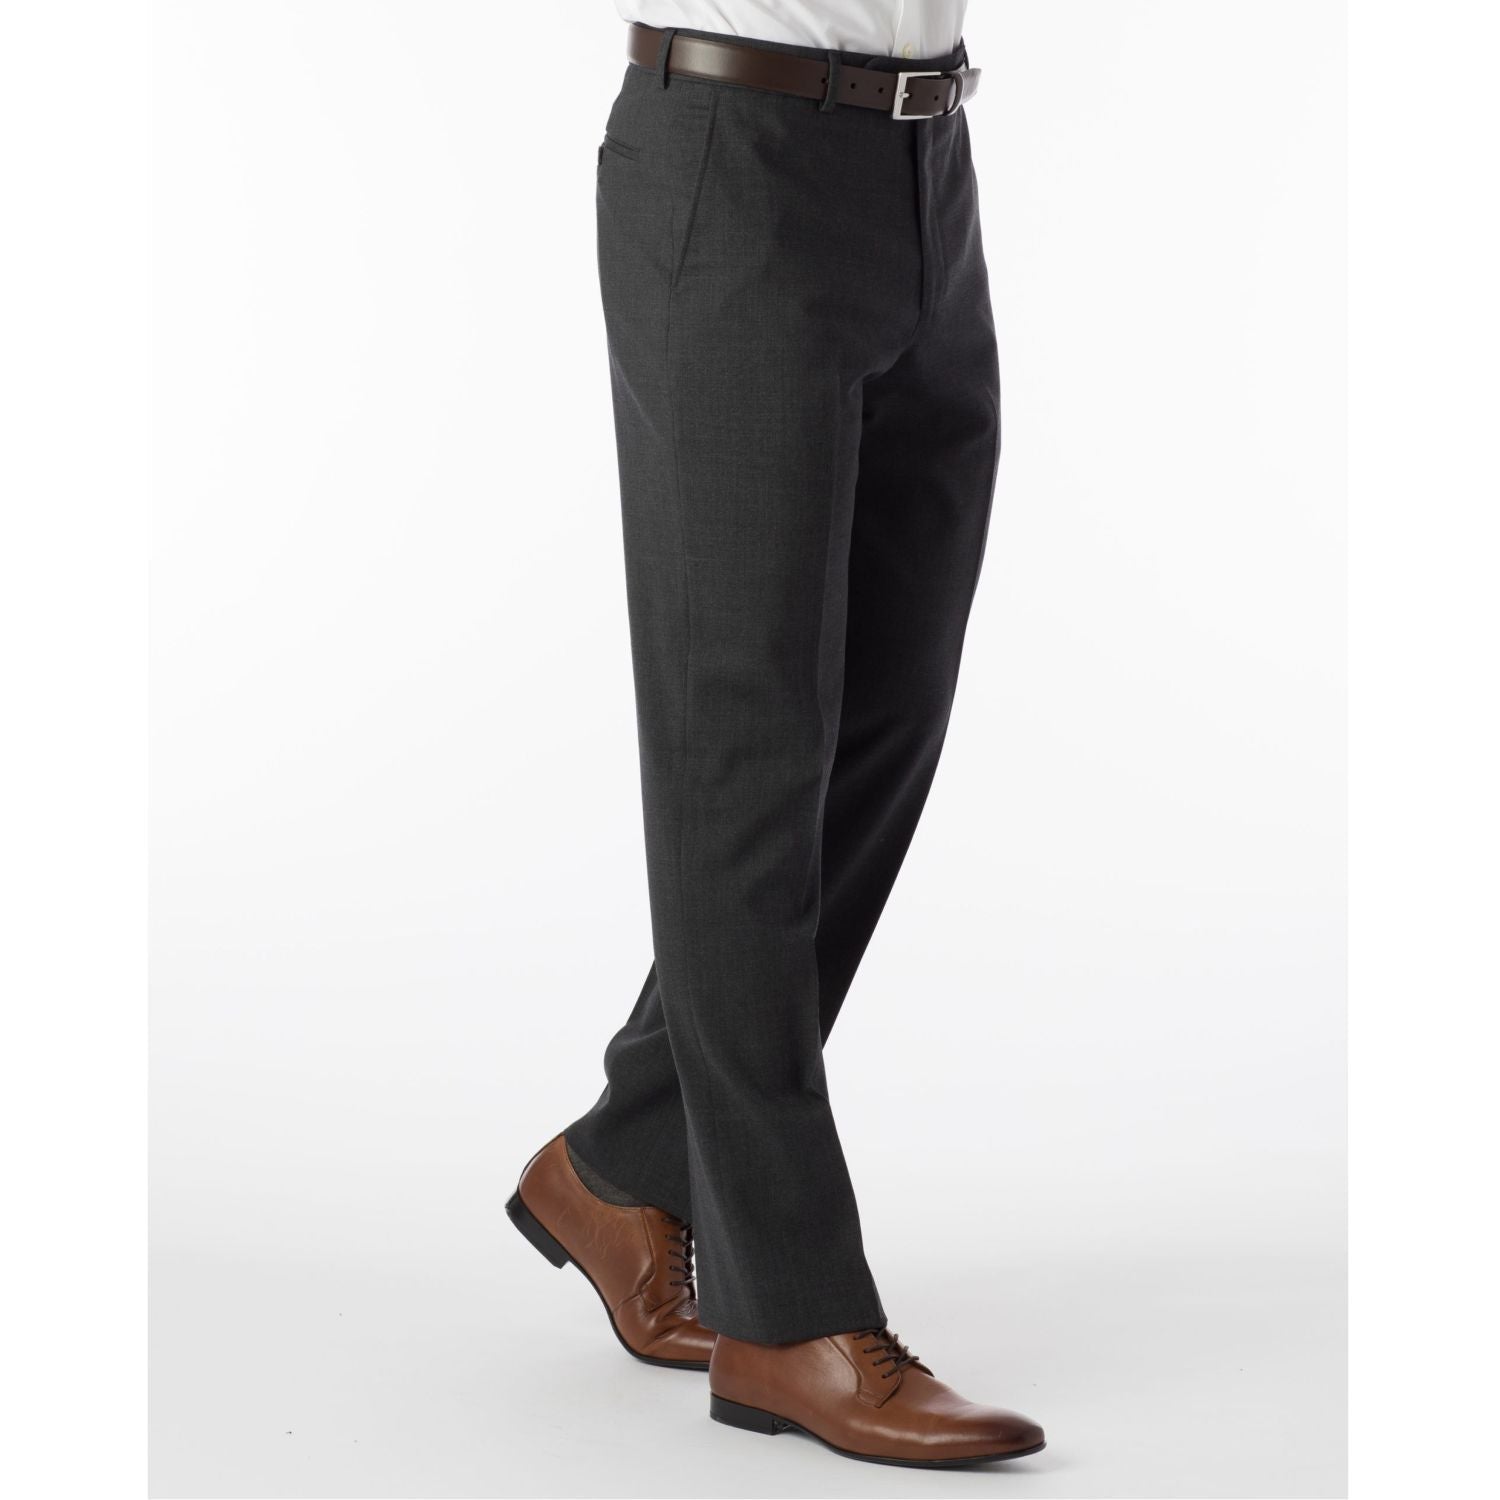 Super 120s Wool Travel Twill Comfort-EZE Trouser in Charcoal Grey, Size 38 (Soho Modern Fit) by Ballin